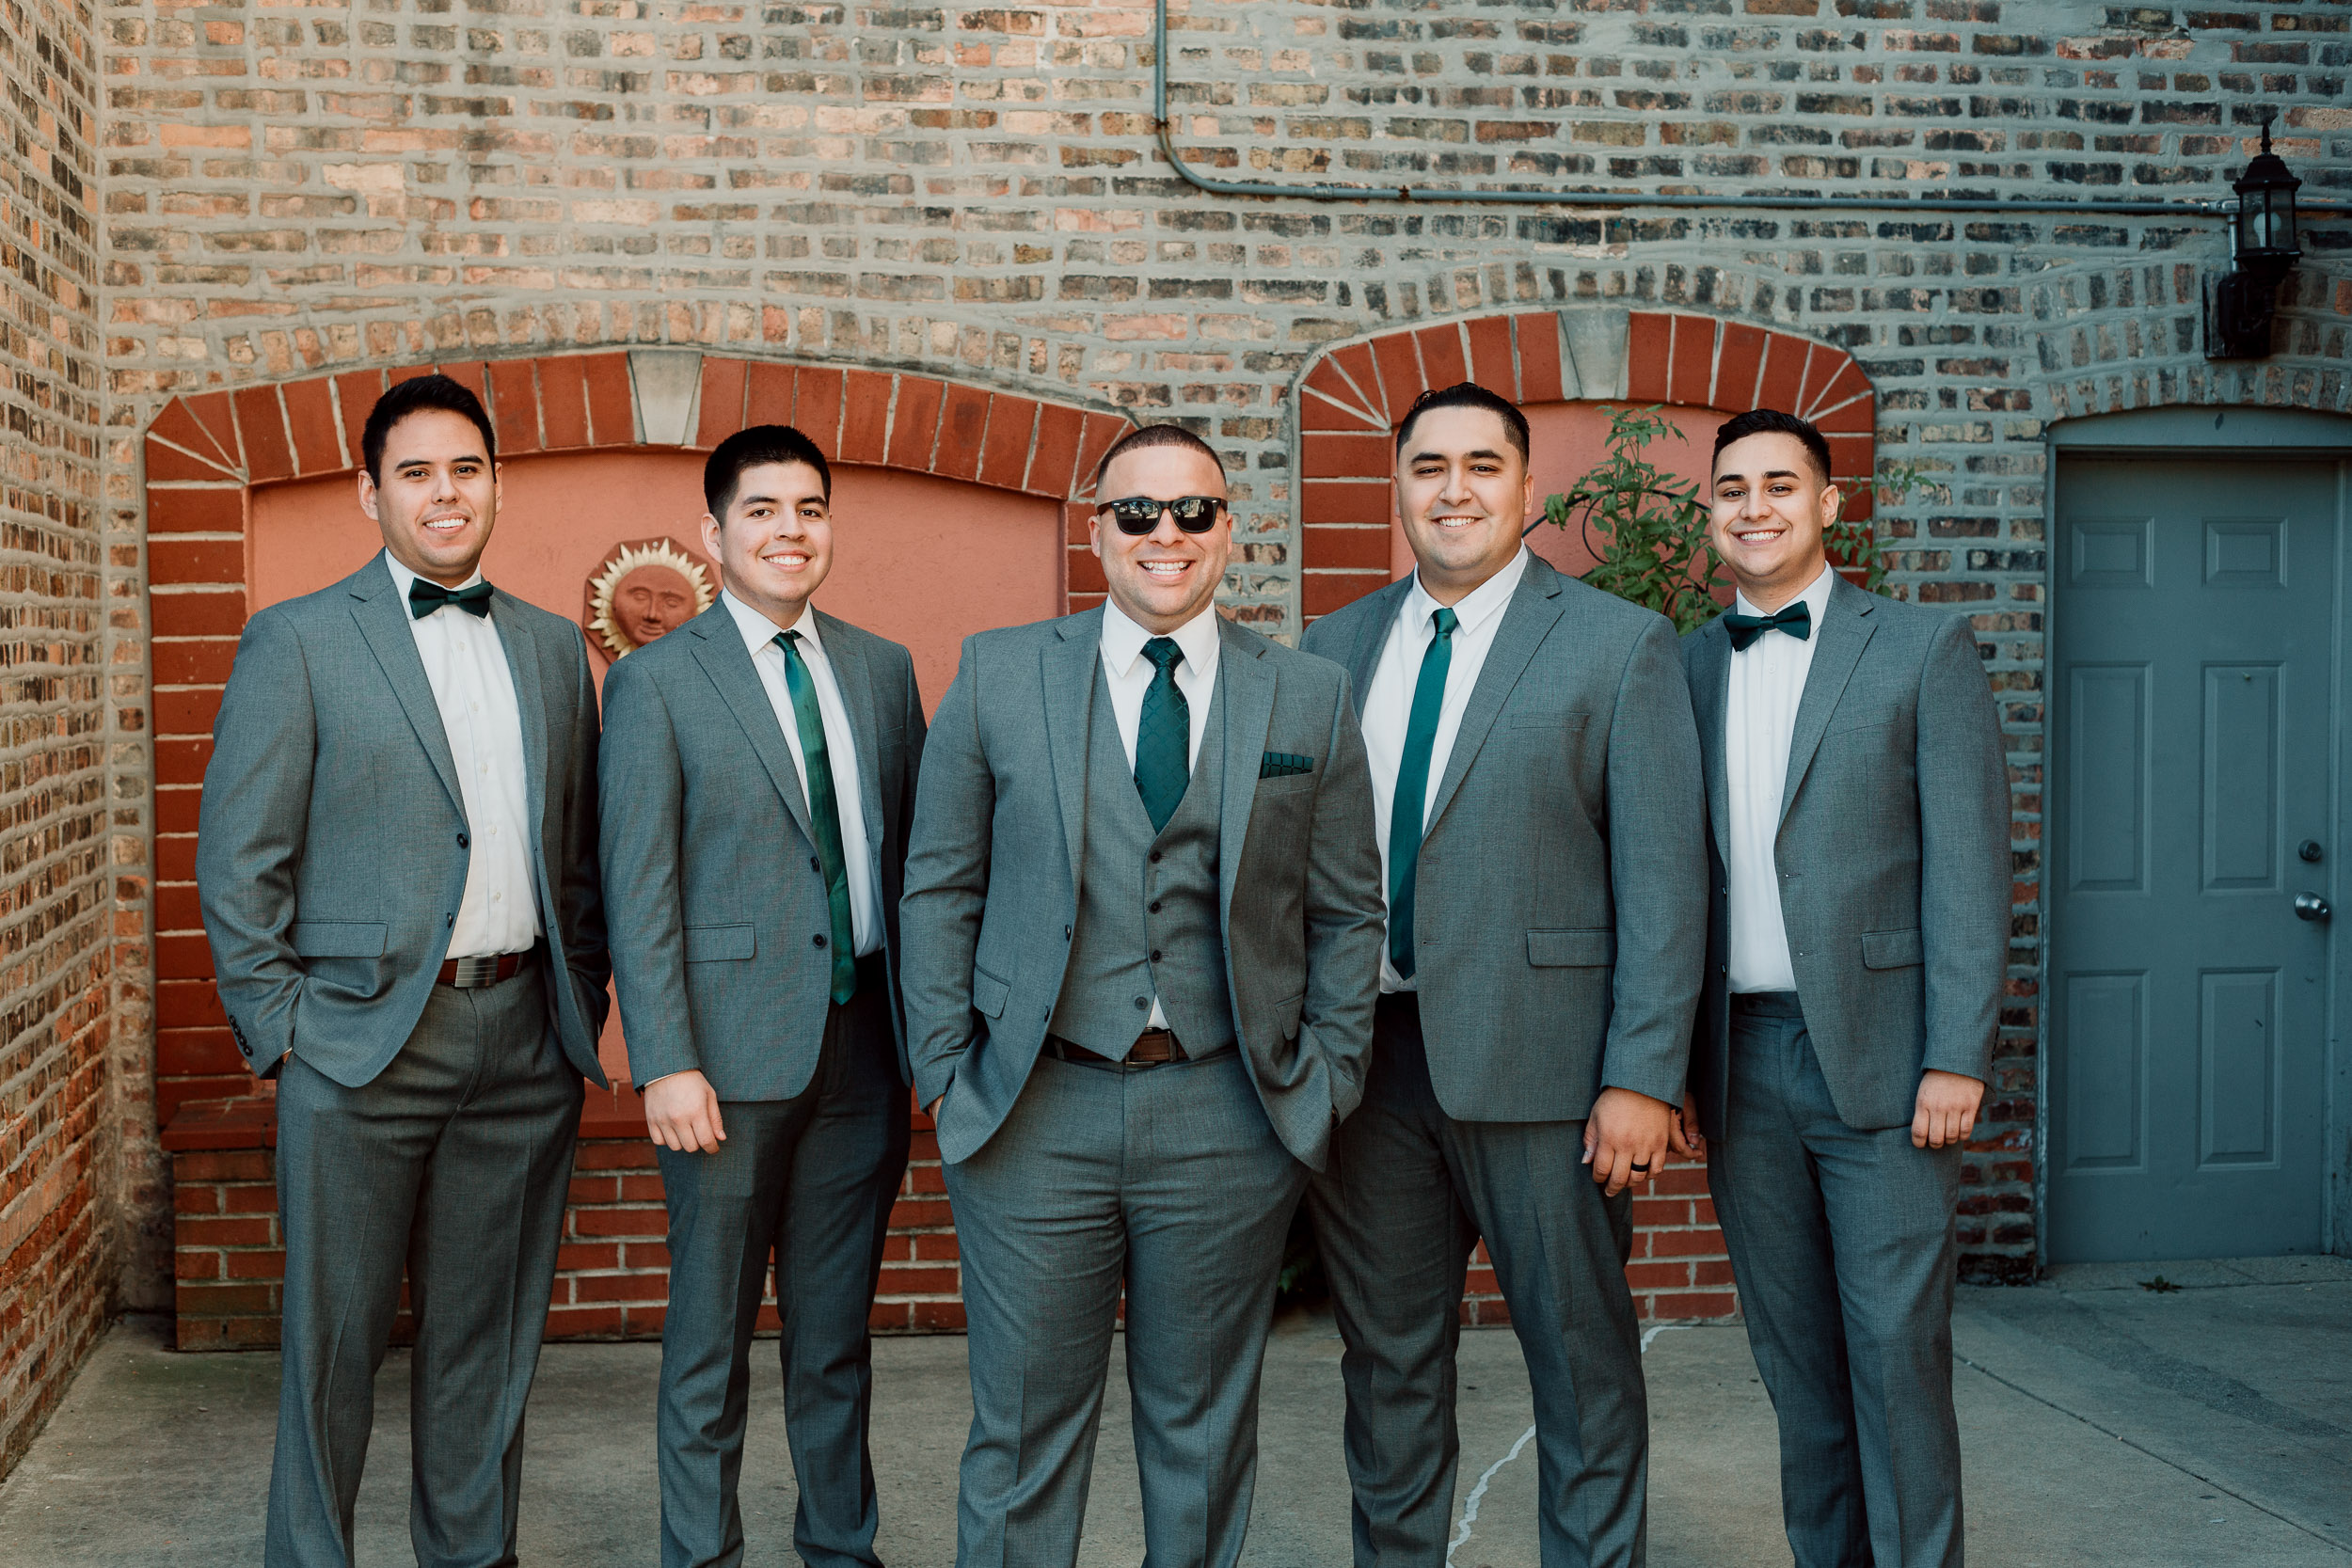 Groomsmen photos | Bridal party photos | Backyard Chicago Wedding | Engagement Ring | Hair Pin | Emotional Chicago Wedding | Historic Downtown Riverside Wedding Photos | Chicago Wedding Photographer | Metra Station Wedding Photos | Small Weddings in Chicago | Intimate Elopements in Chicago